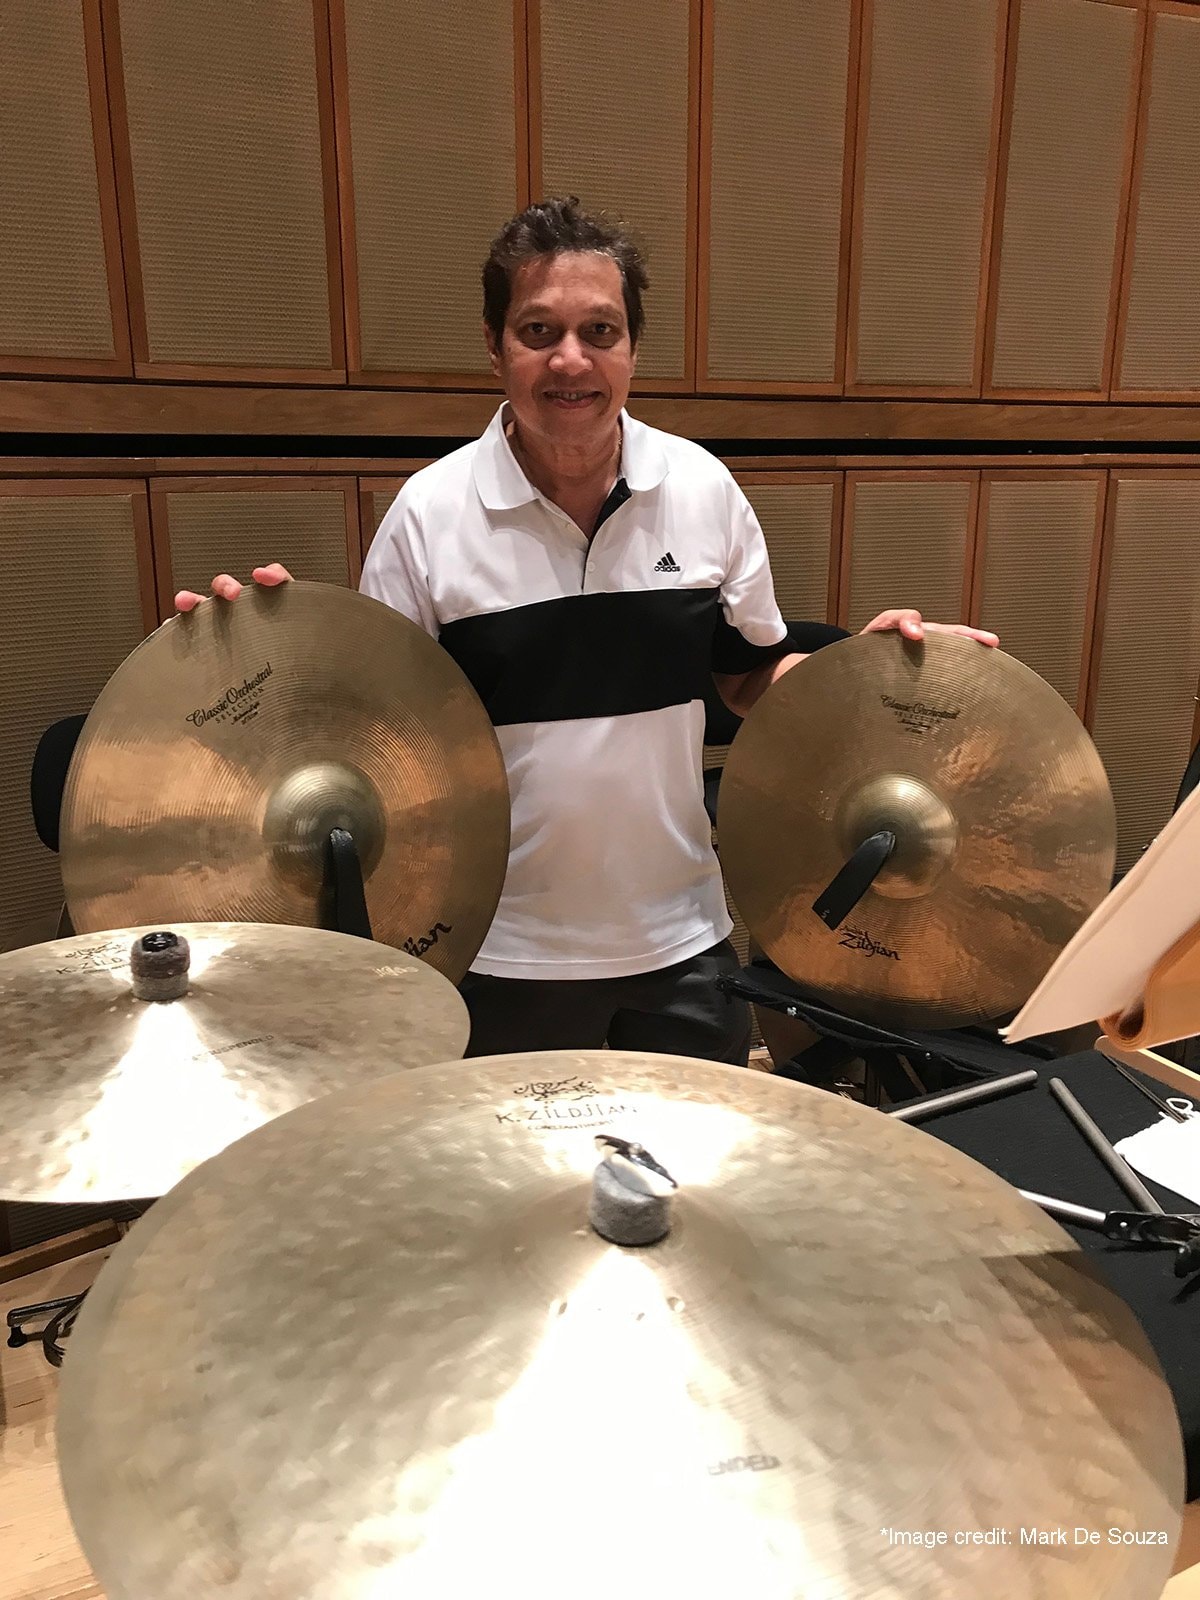 Being a Zildjian Endorsee, what are some of your favourite cymbals? And why would you prefer Zildjian? 